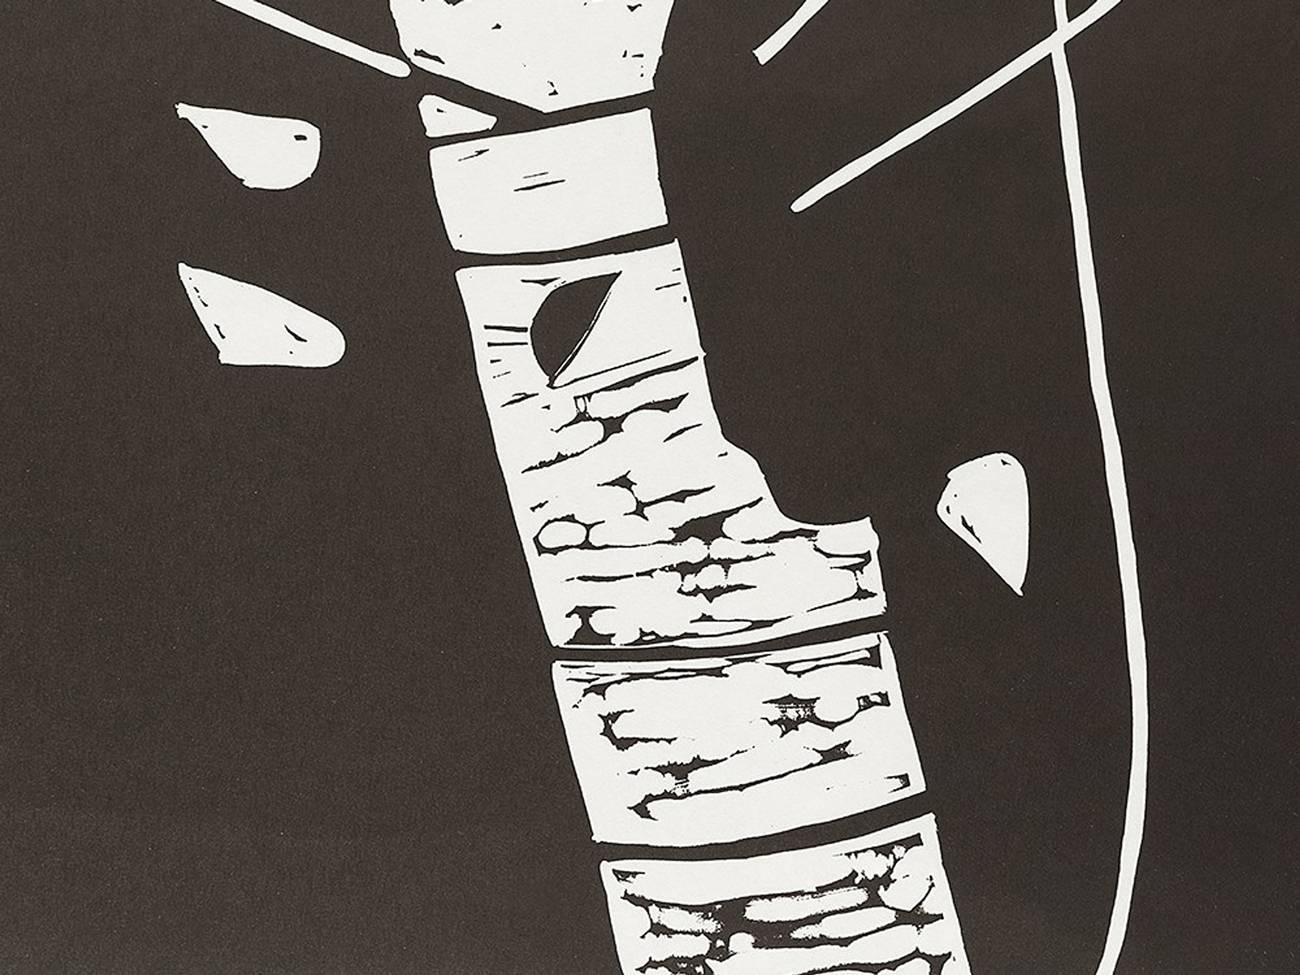 Alex Katz (born 1927 in Brooklyn)
Large Birch, 2005
Linoleum cut on Japan (Hiromi Mulberry Heavyweight paper)
Dimensions: 153.5 x 92.5 cm (162.5 × 100.5 cm)
Edition of 25 + 6 A.P.
Signed and numbered
Catalogue Raisonné: Schröder, no. 394, pg. 233